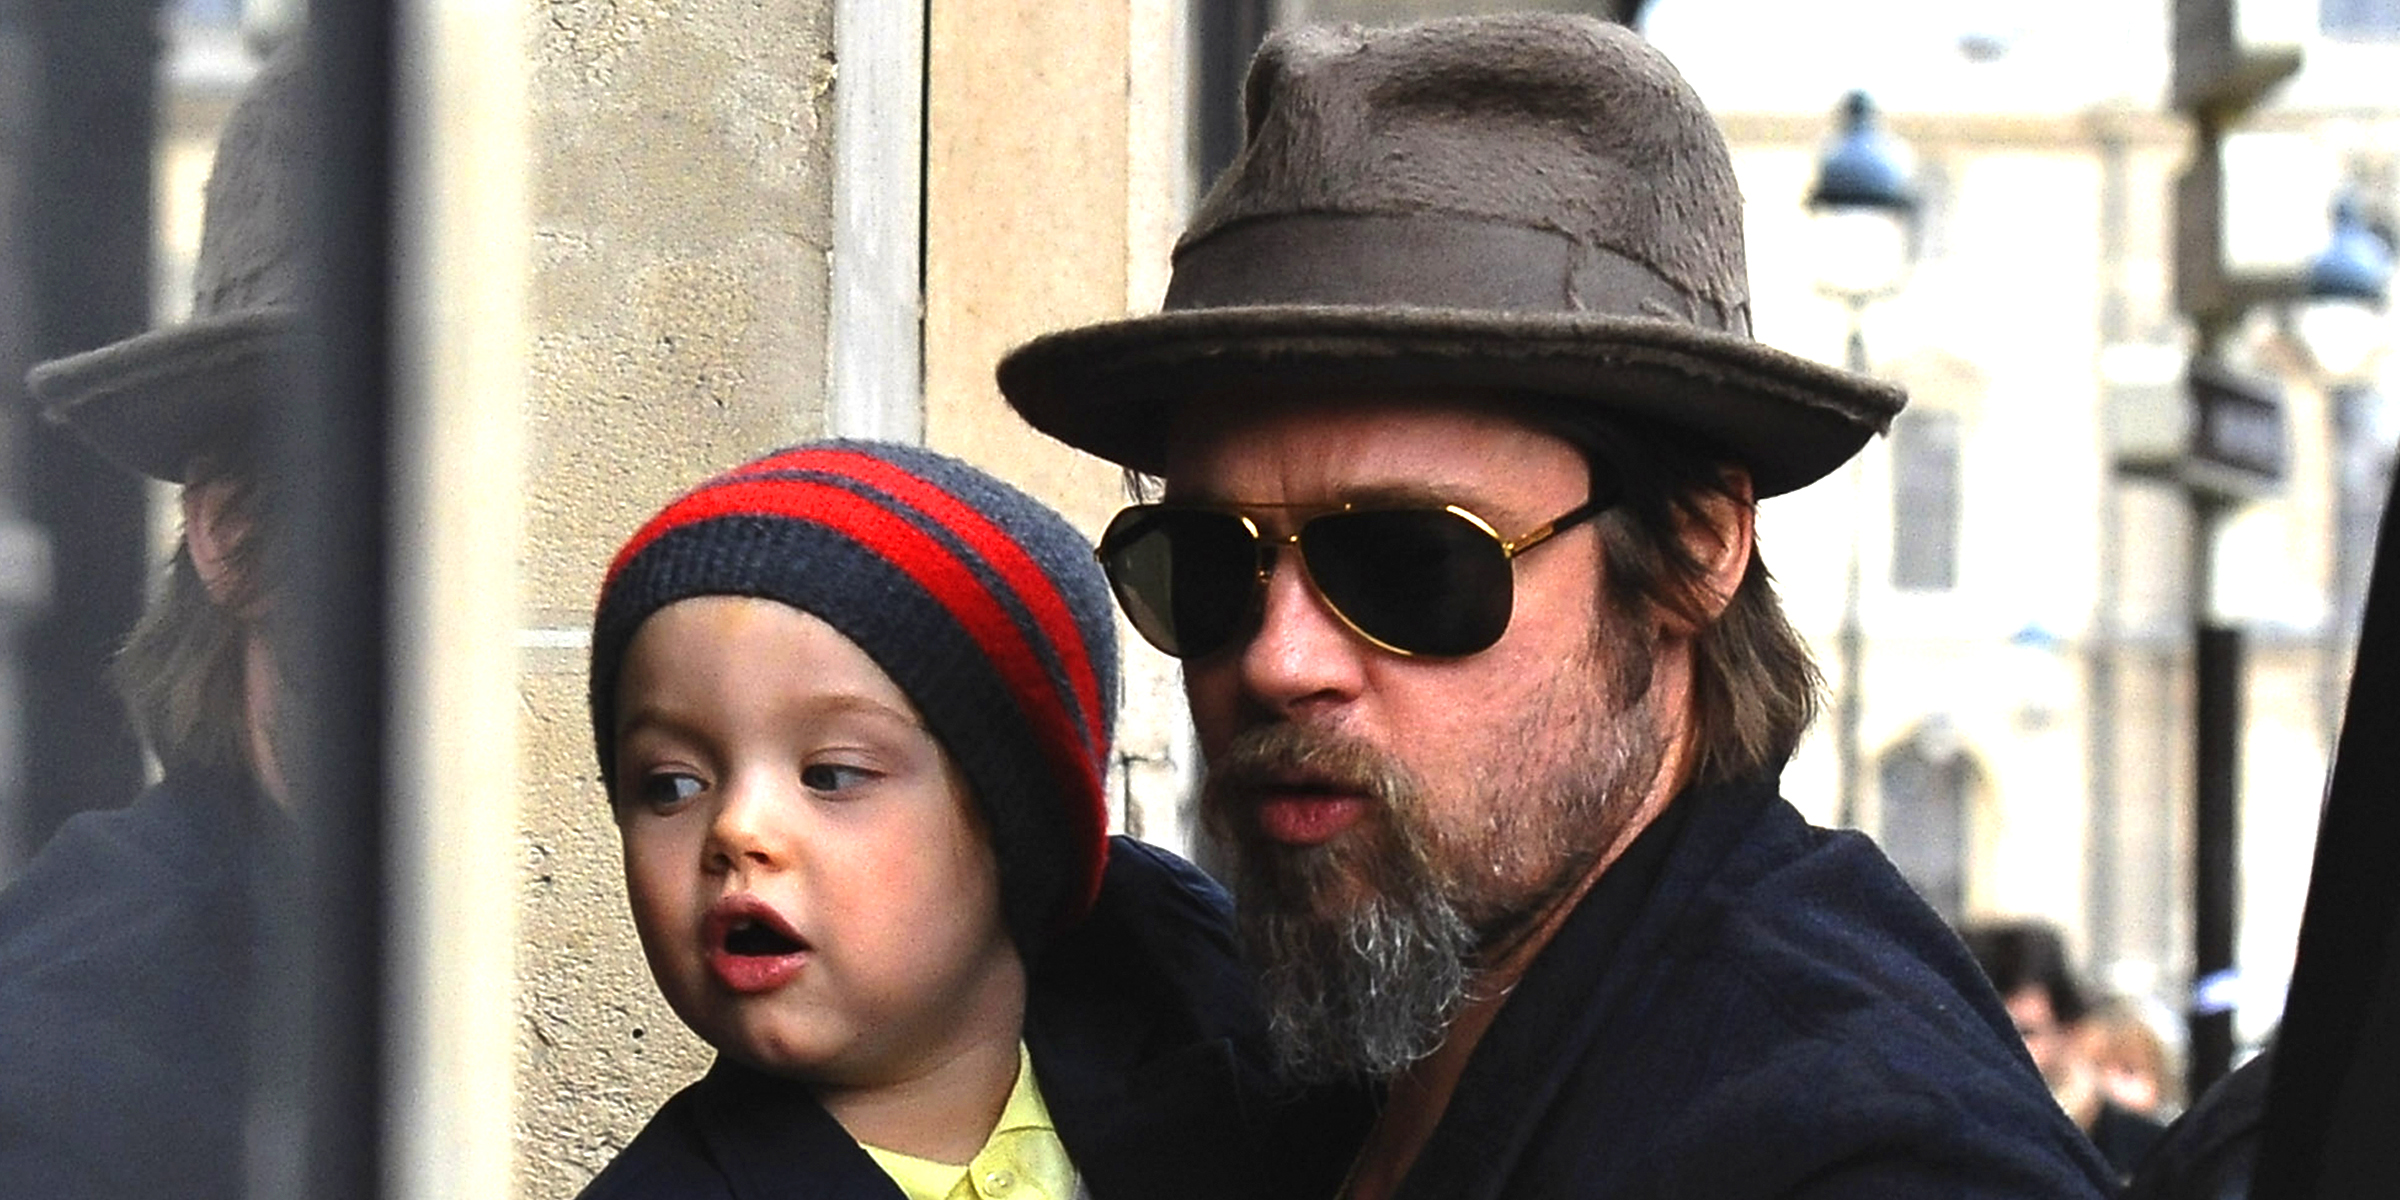 Brad Pitt and his daughter Shiloh | Source: Getty Images